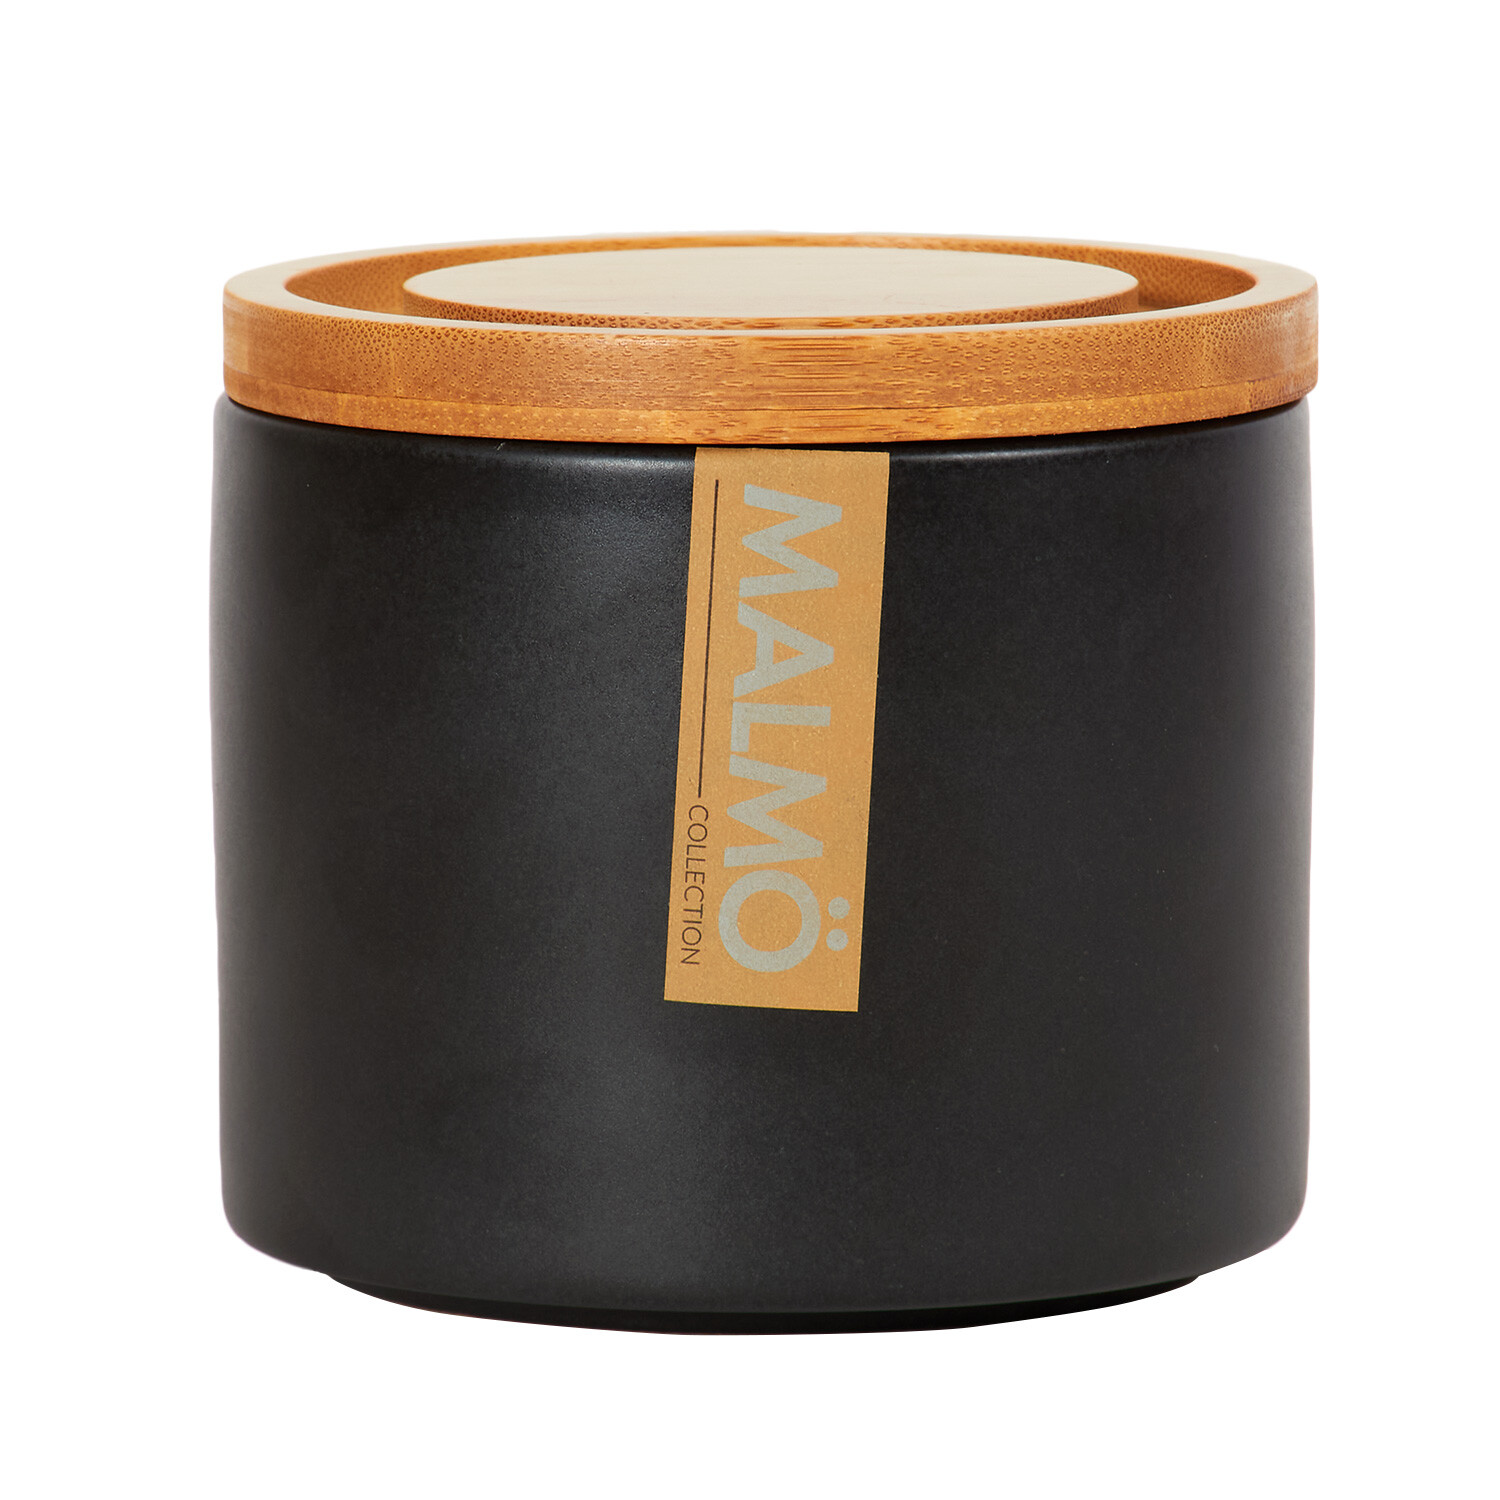 Malmo Stacking Canister - Black Image 1